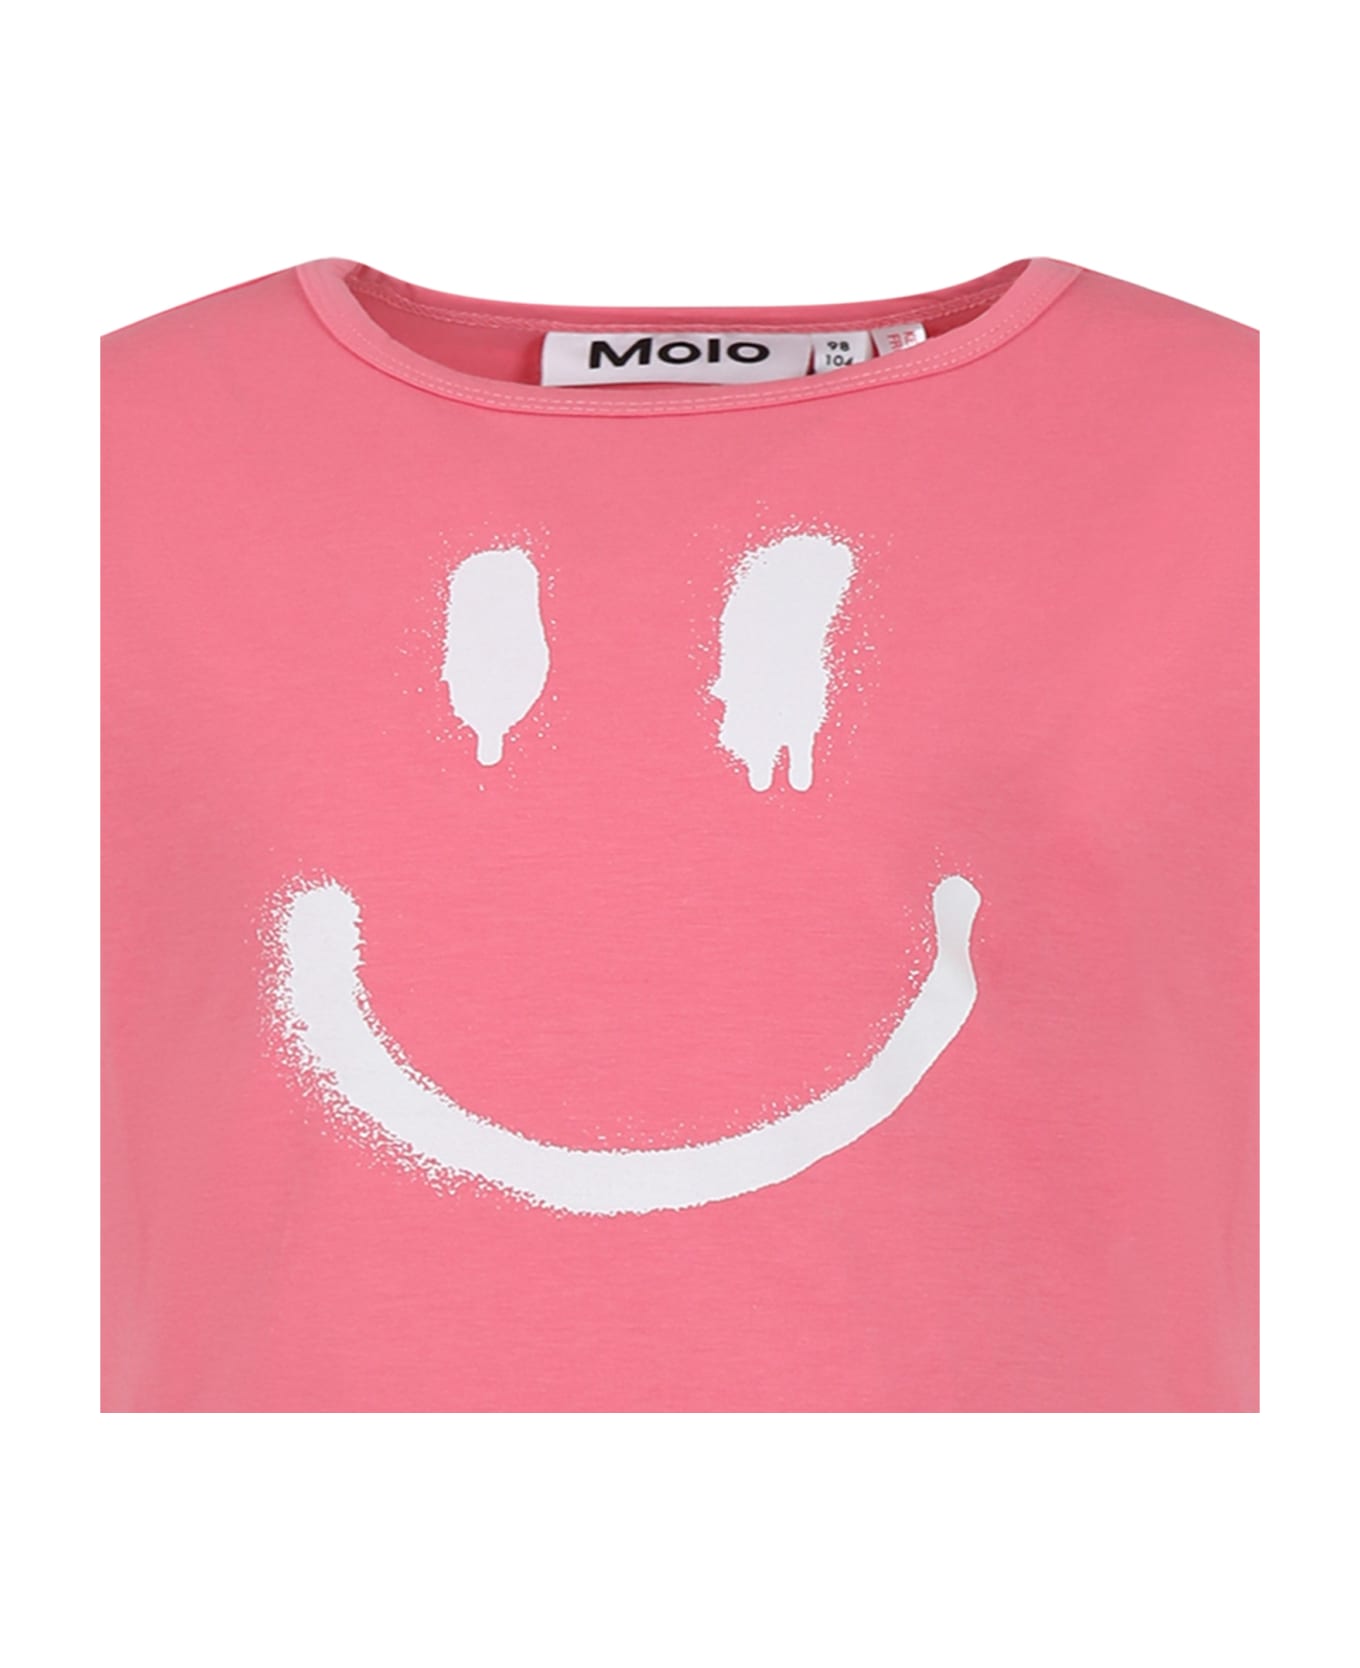 Molo Pink Pajamas For Kids With Smiley - Pink